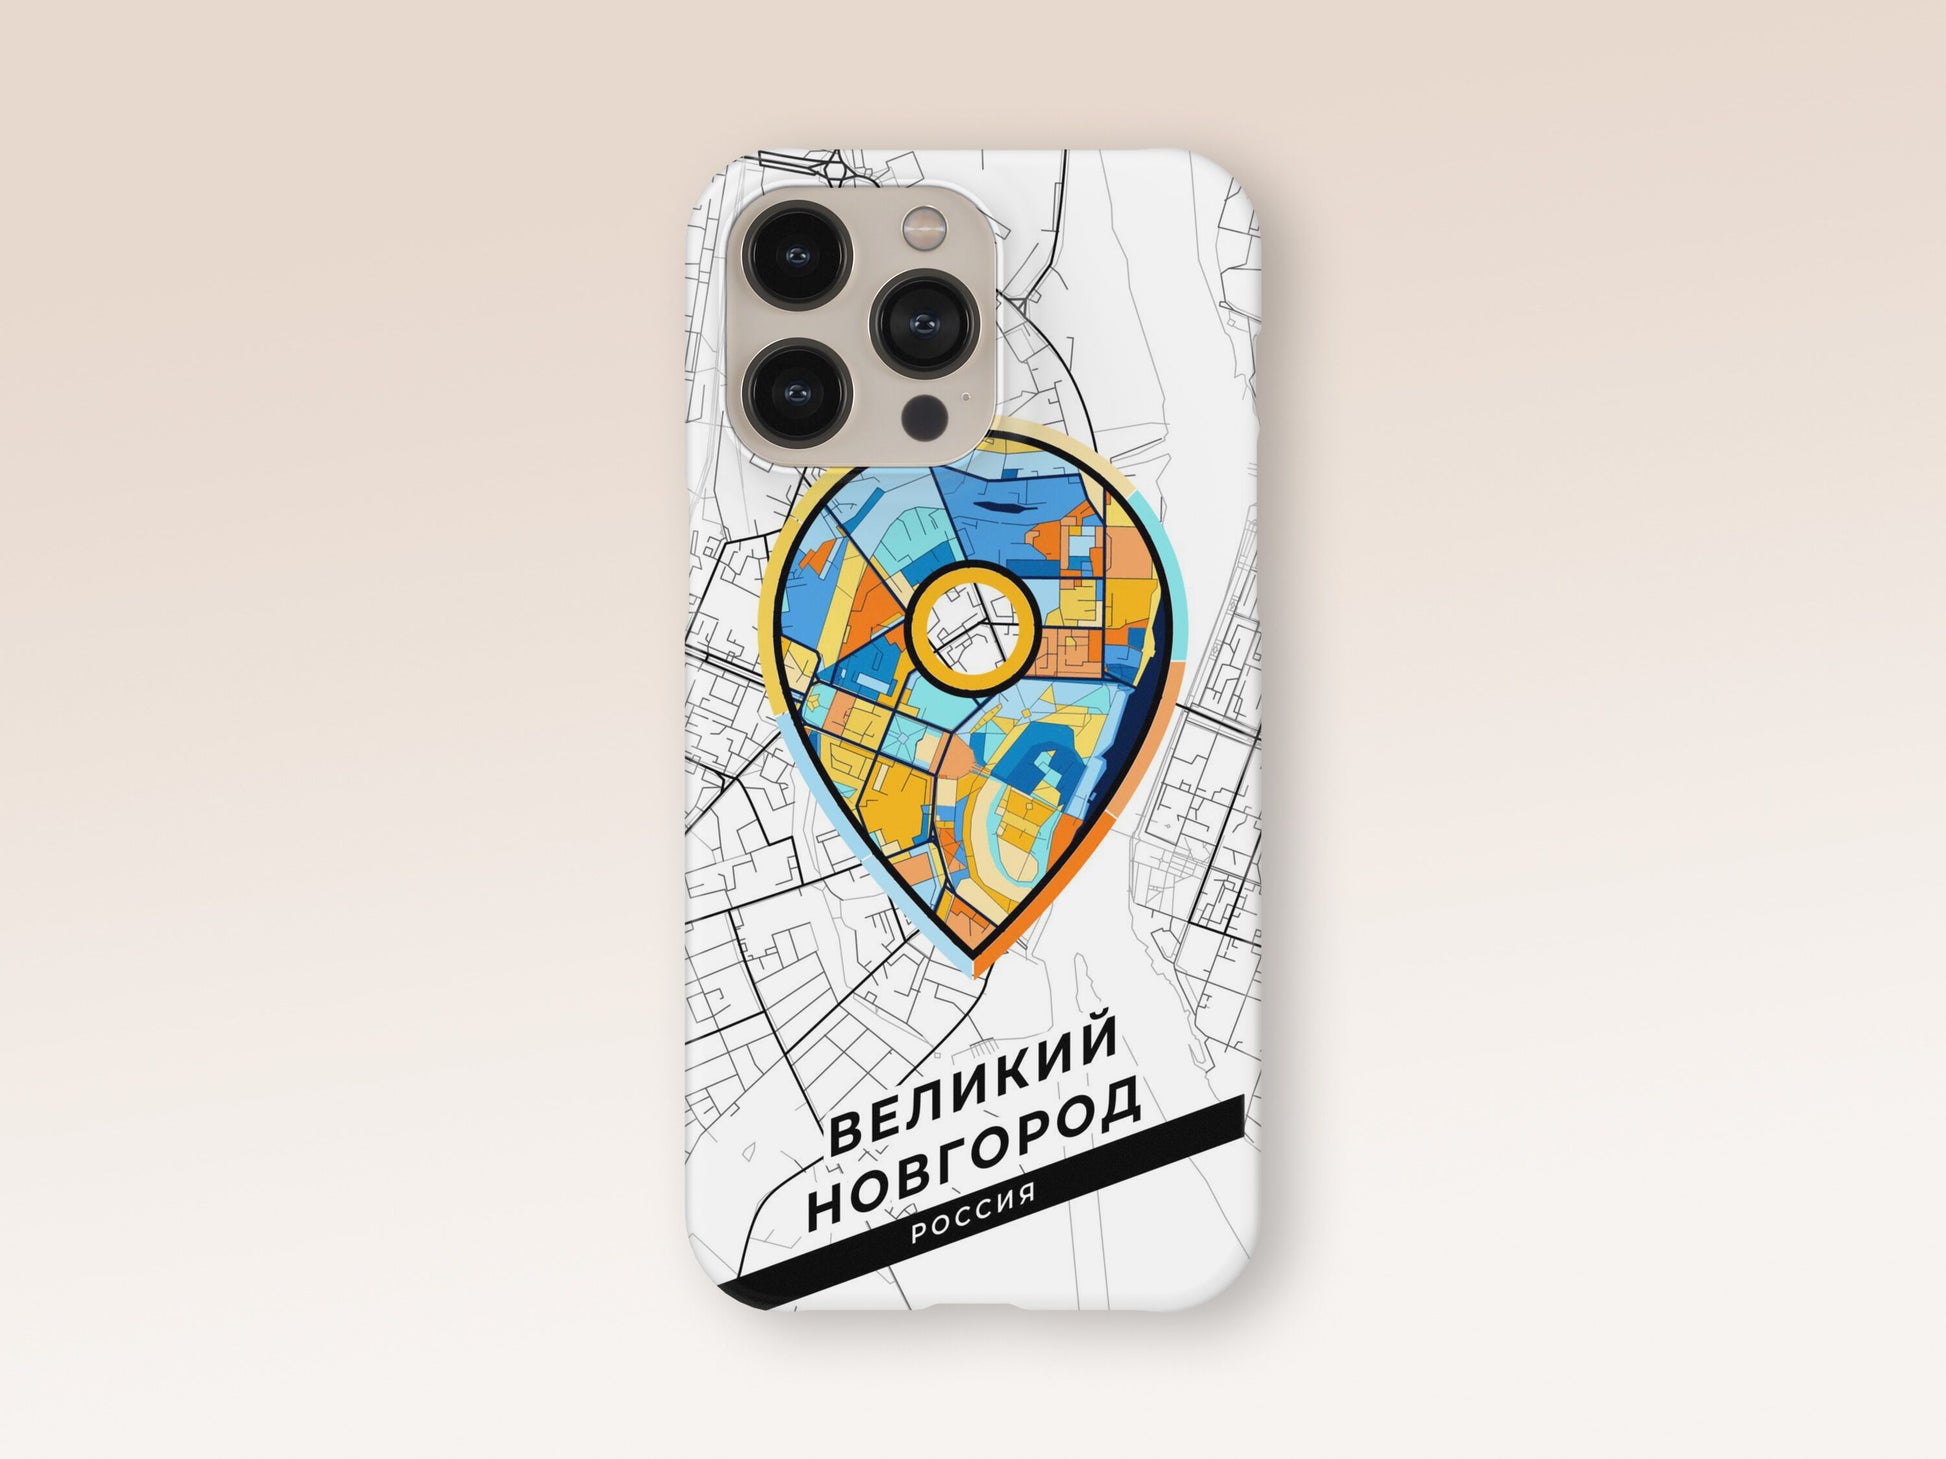 Veliky Novgorod Russia slim phone case with colorful icon 1